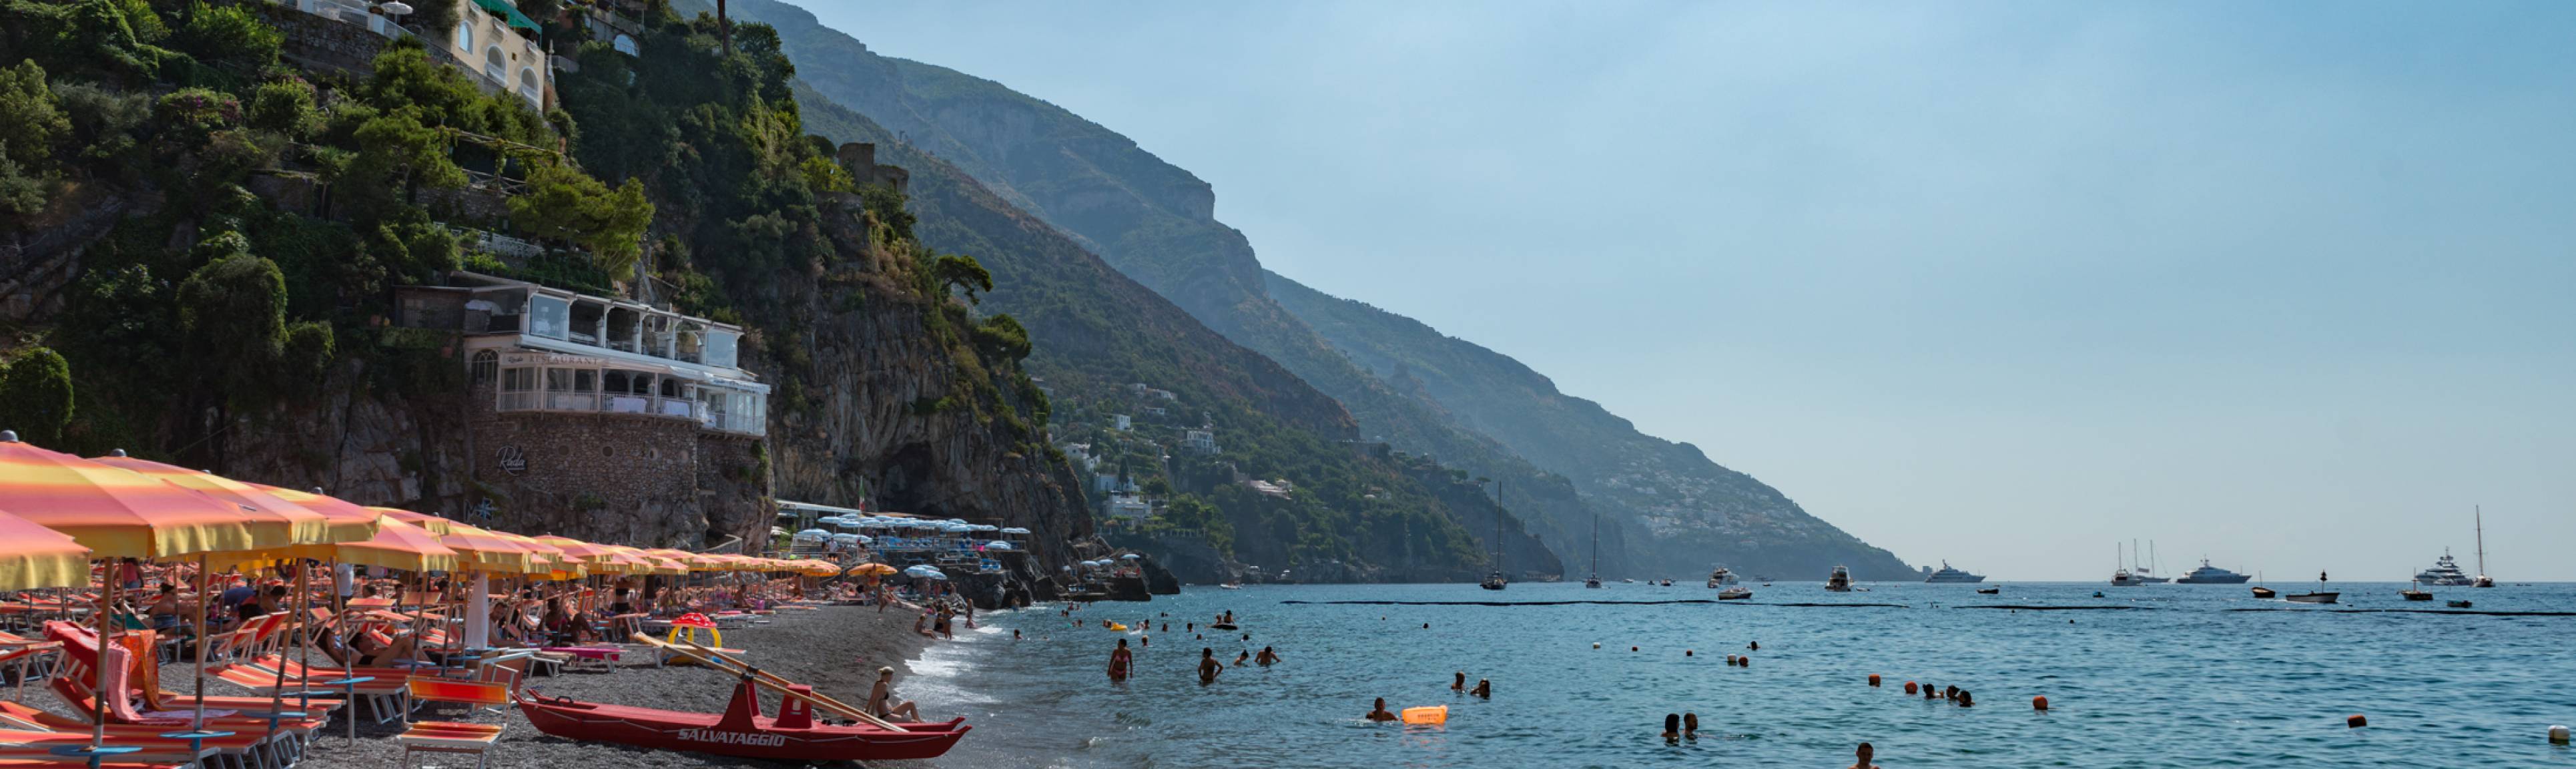 Panoramic view of people bathing in beaches of Amalfi Coast